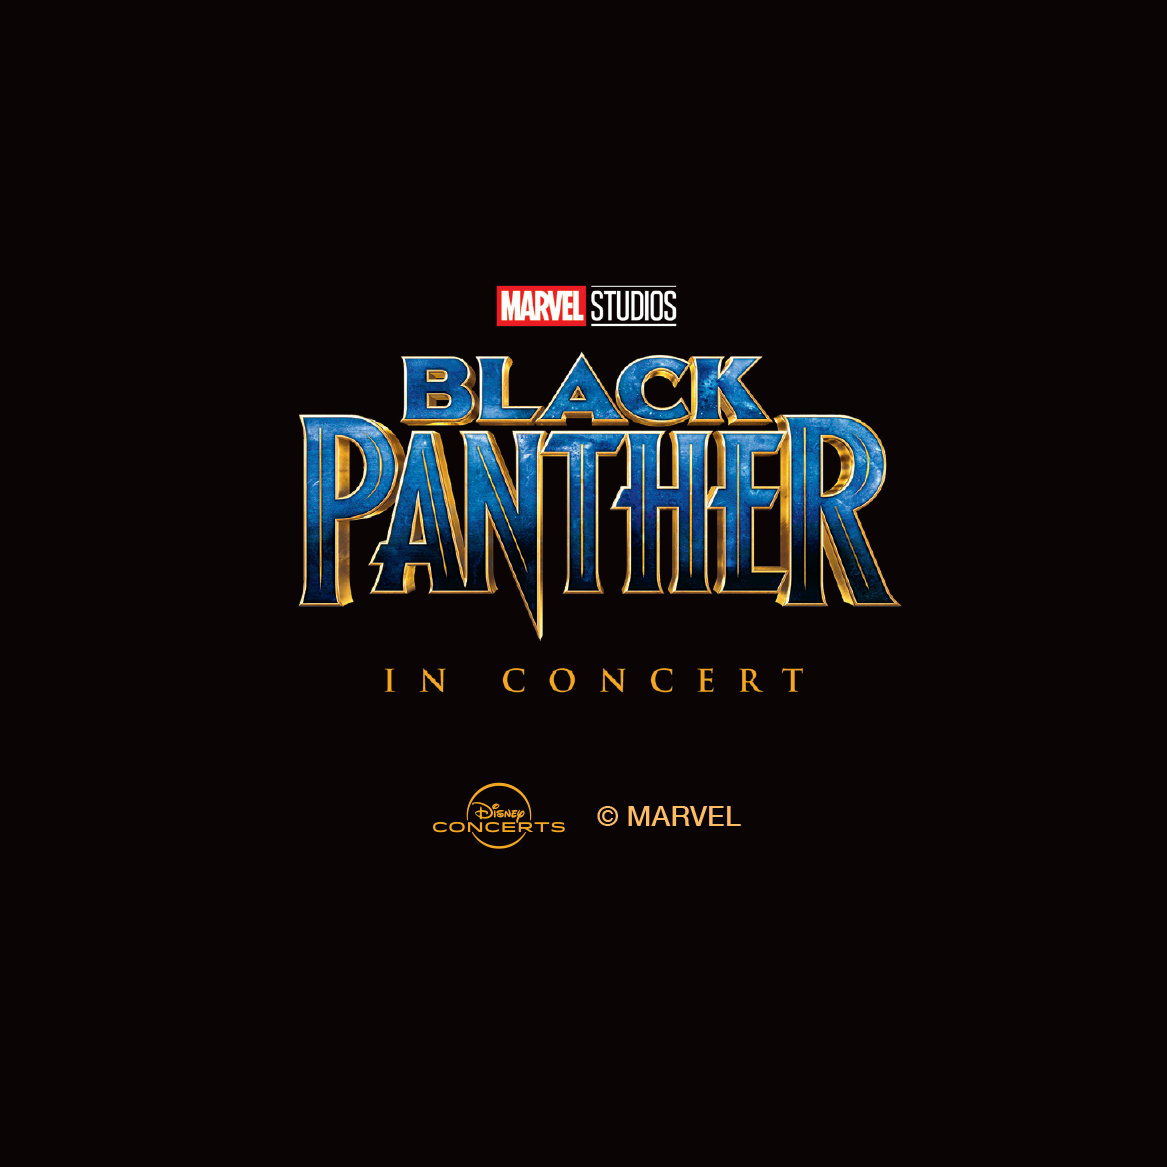 Image for Black Panther in Concert